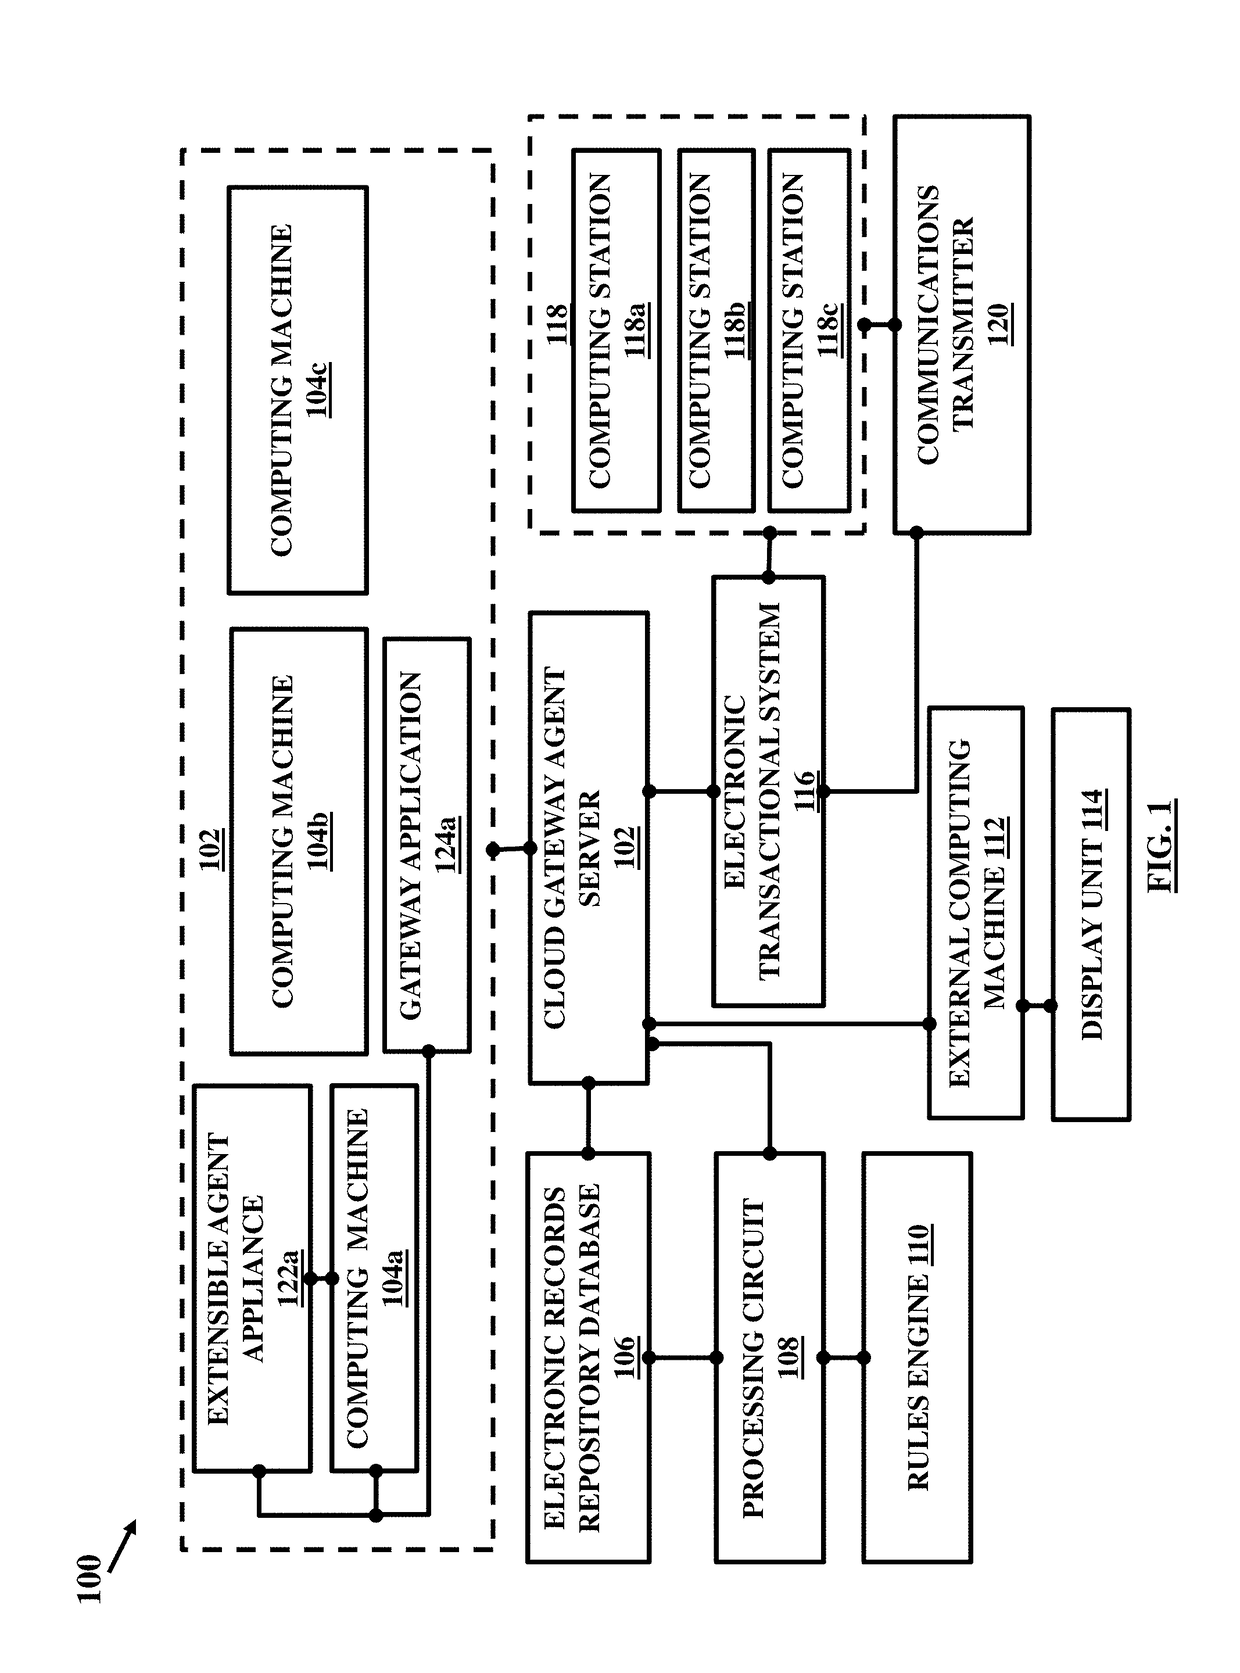 Multi-source user generated electronic data integration in a blockchain-based transactional system